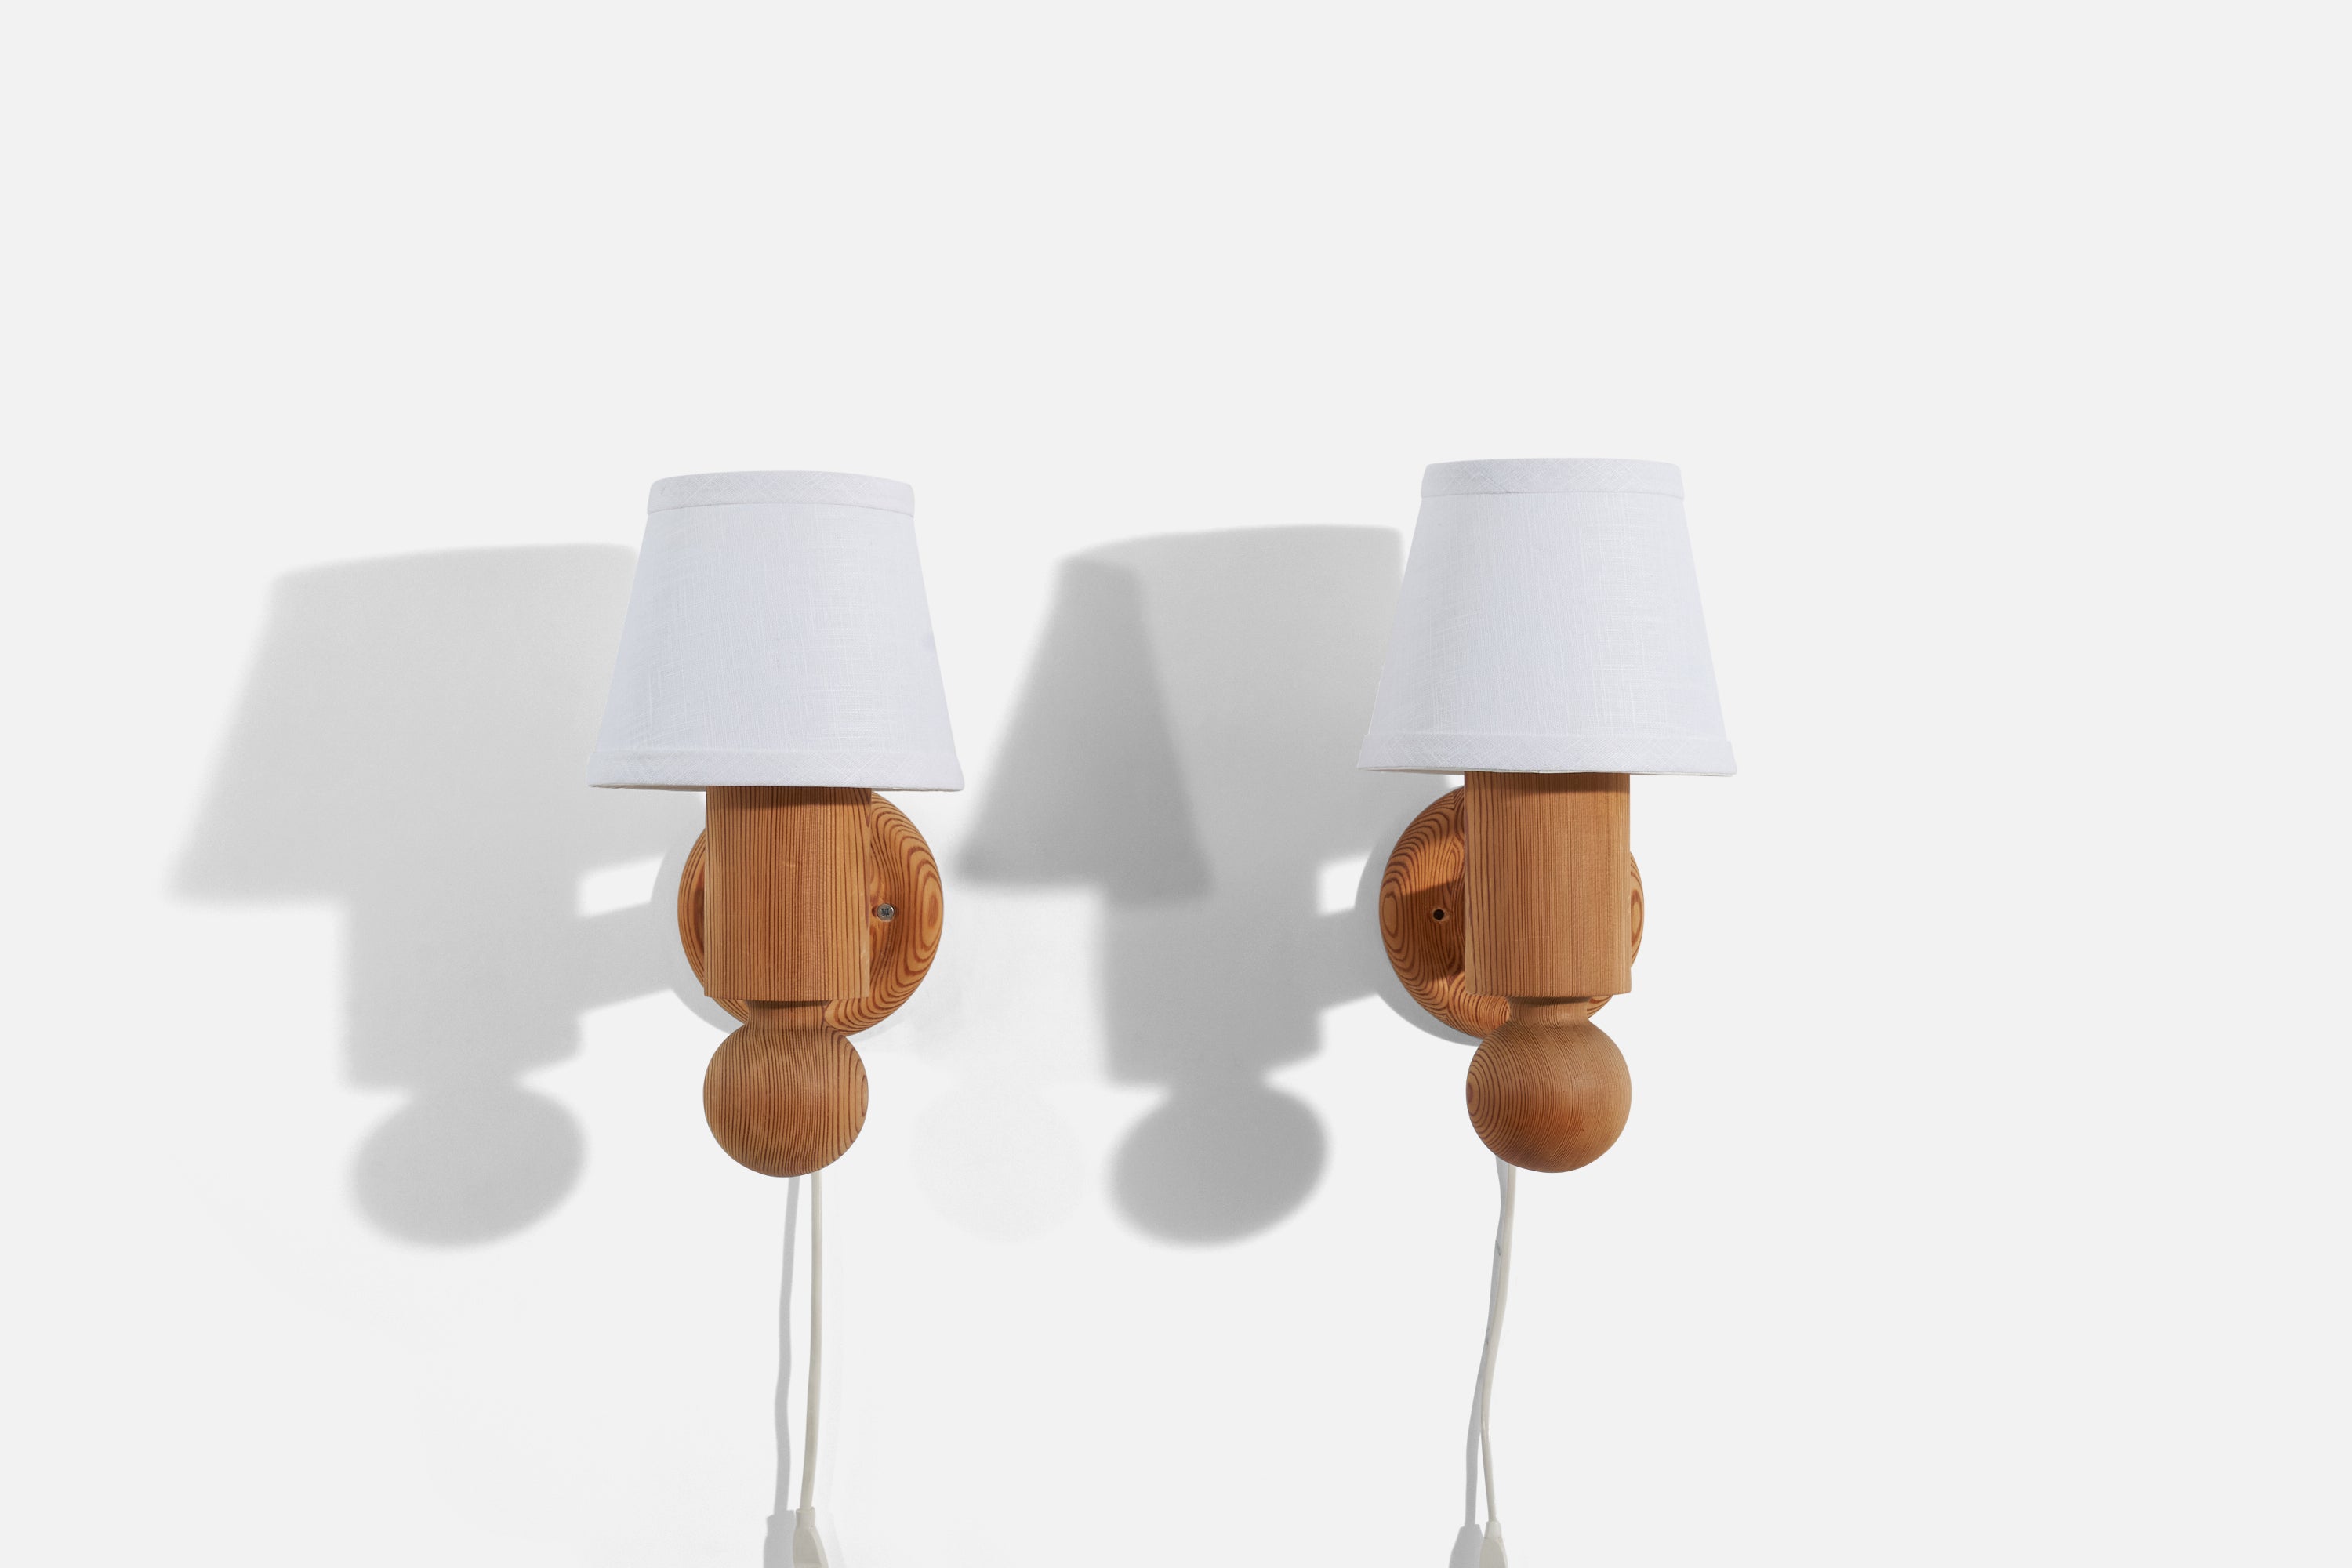 A pair of pine and fabric wall lights designed by Uno Kristiansson and produced by Luxus Vittsjö, Sweden, 1960s.

Dimensions of Sconce (inches) : 6.875 x 4.75 x 7 (H x W x D)
Dimensions of Shade (inches) : 4 x 6 x 5 (T x B x H)
Dimensions of